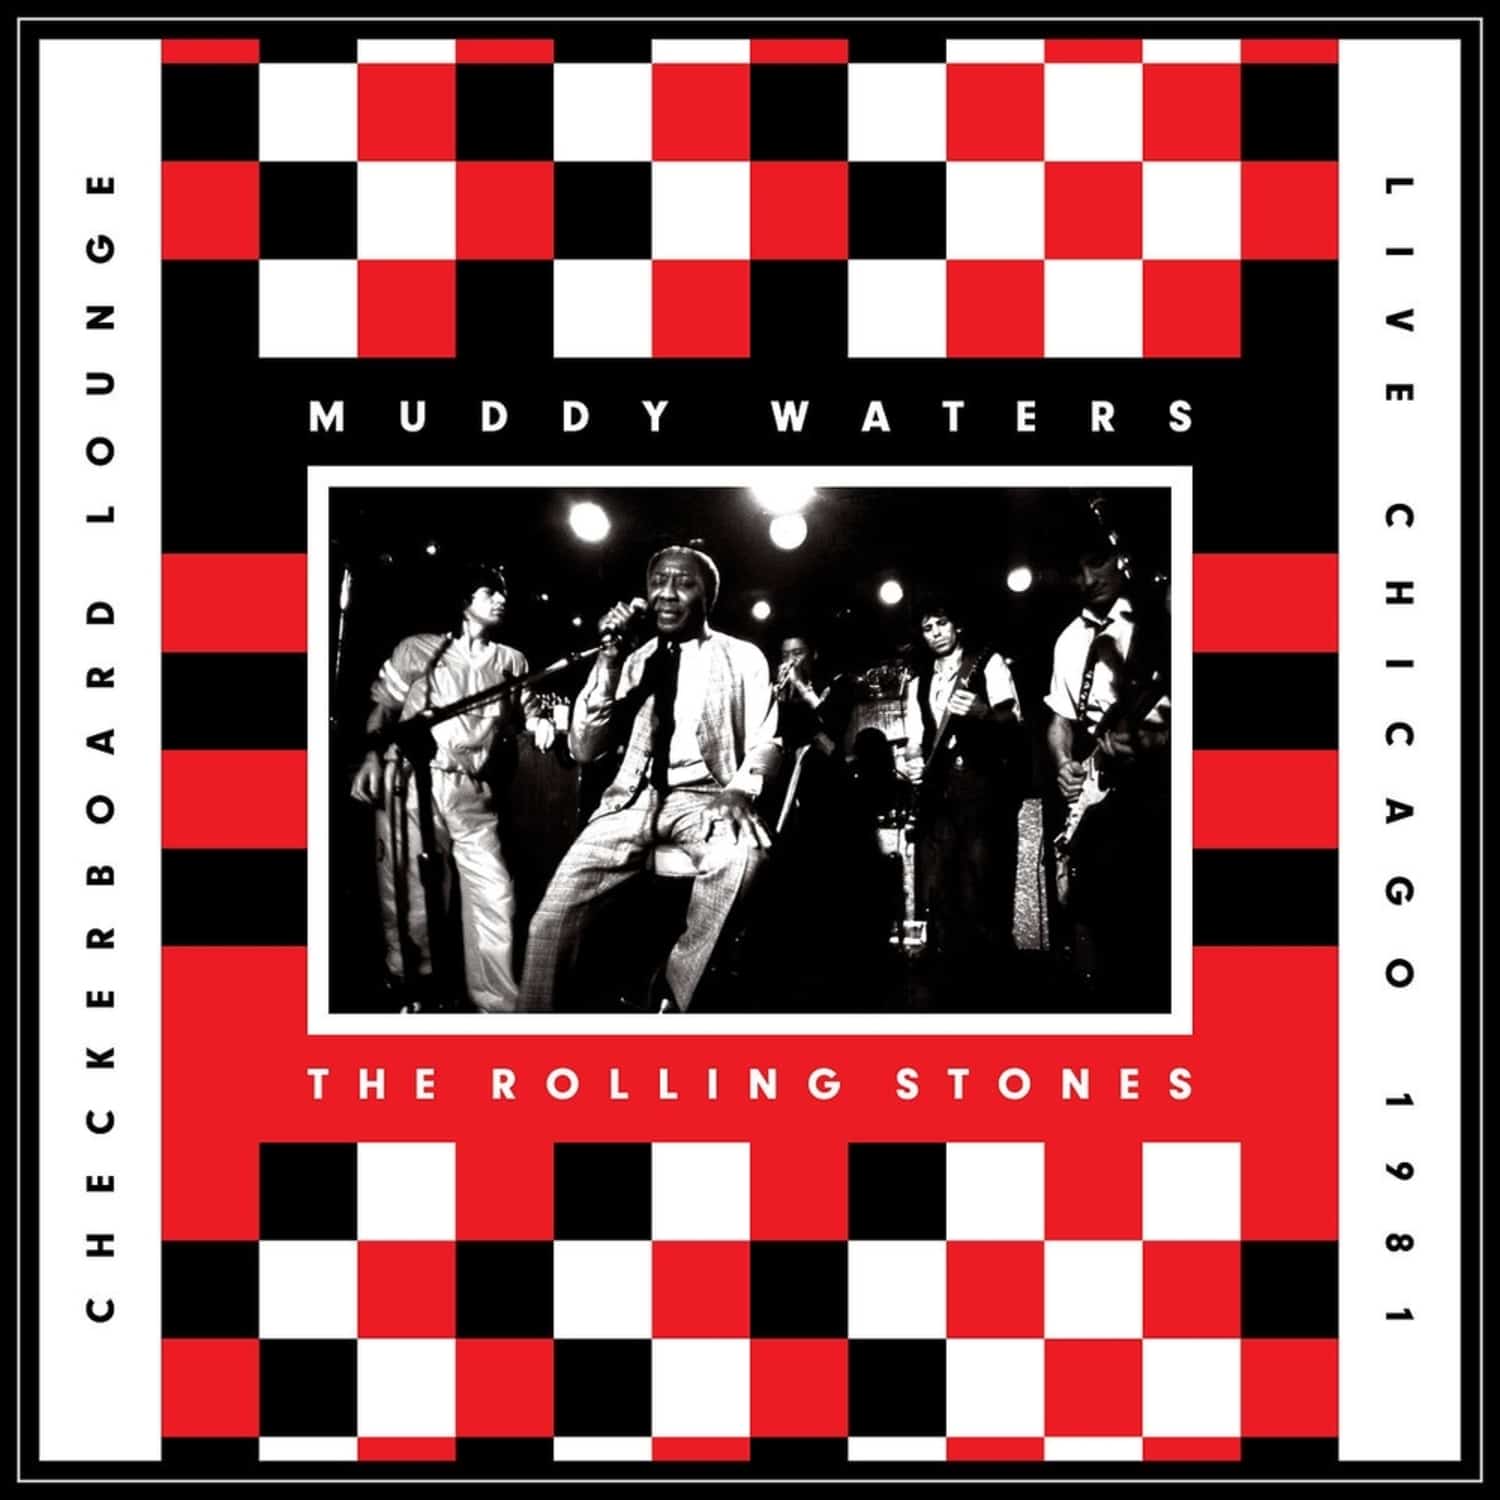 The Rolling Stones & Muddy Waters - LIVE AT THE CHECKERBOARD LOUNGE 